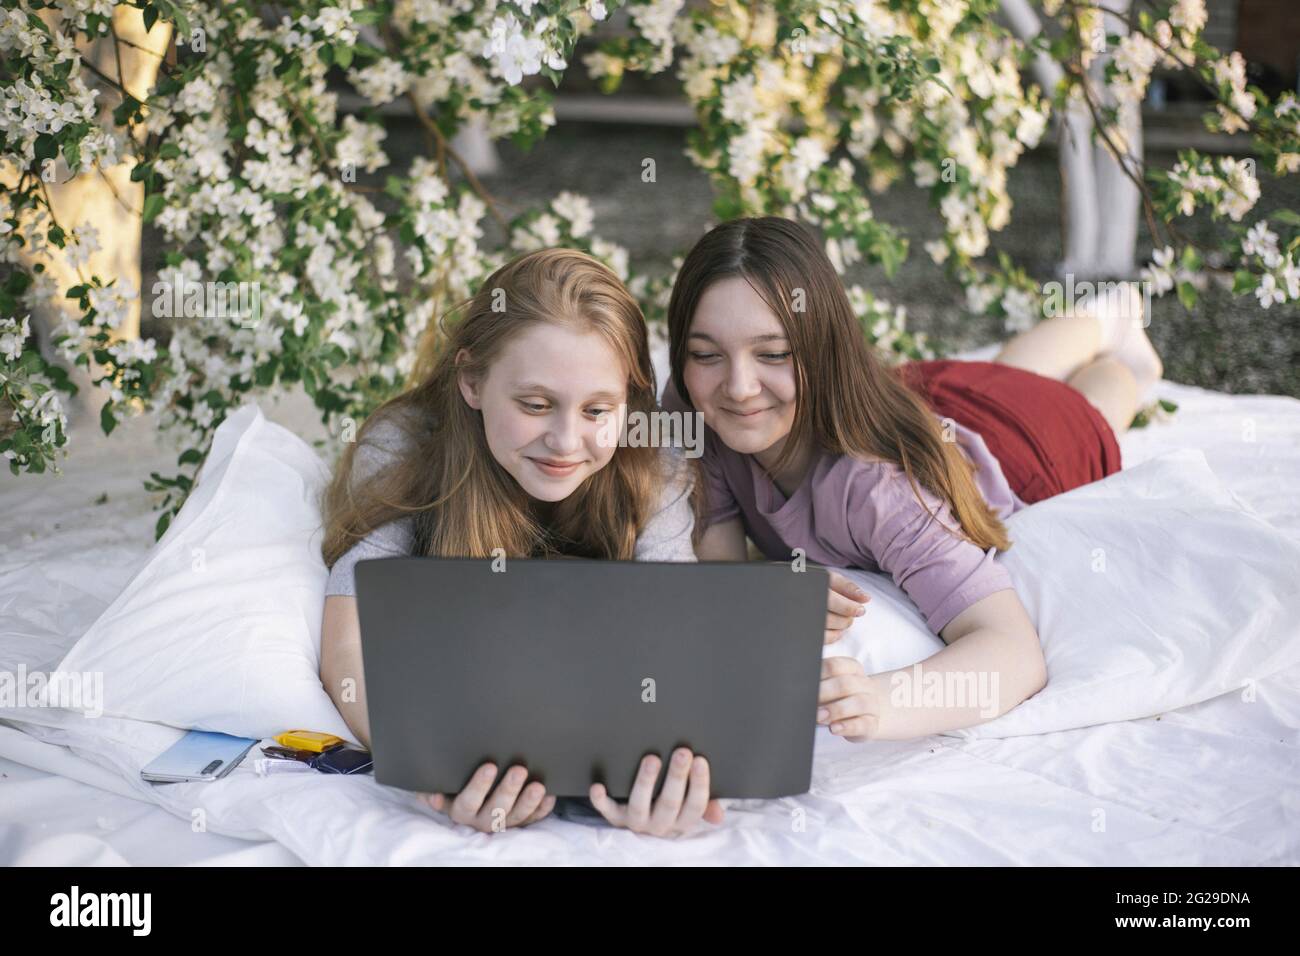 Teen girls looking at laptop lying on bed in the garden Stock Photo